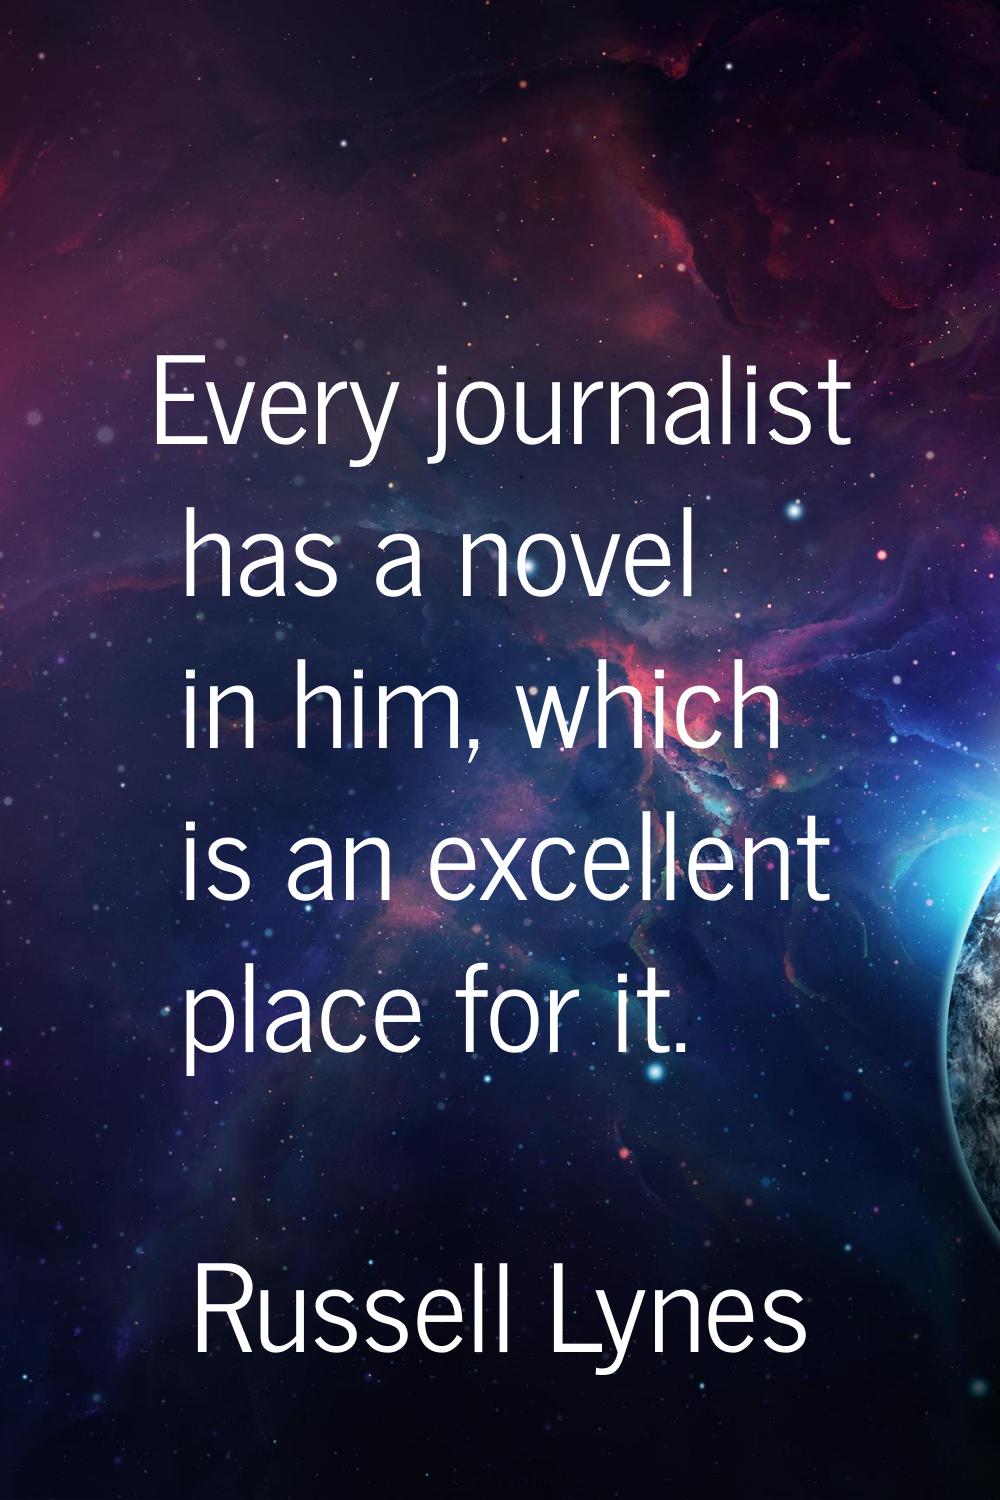 Every journalist has a novel in him, which is an excellent place for it.